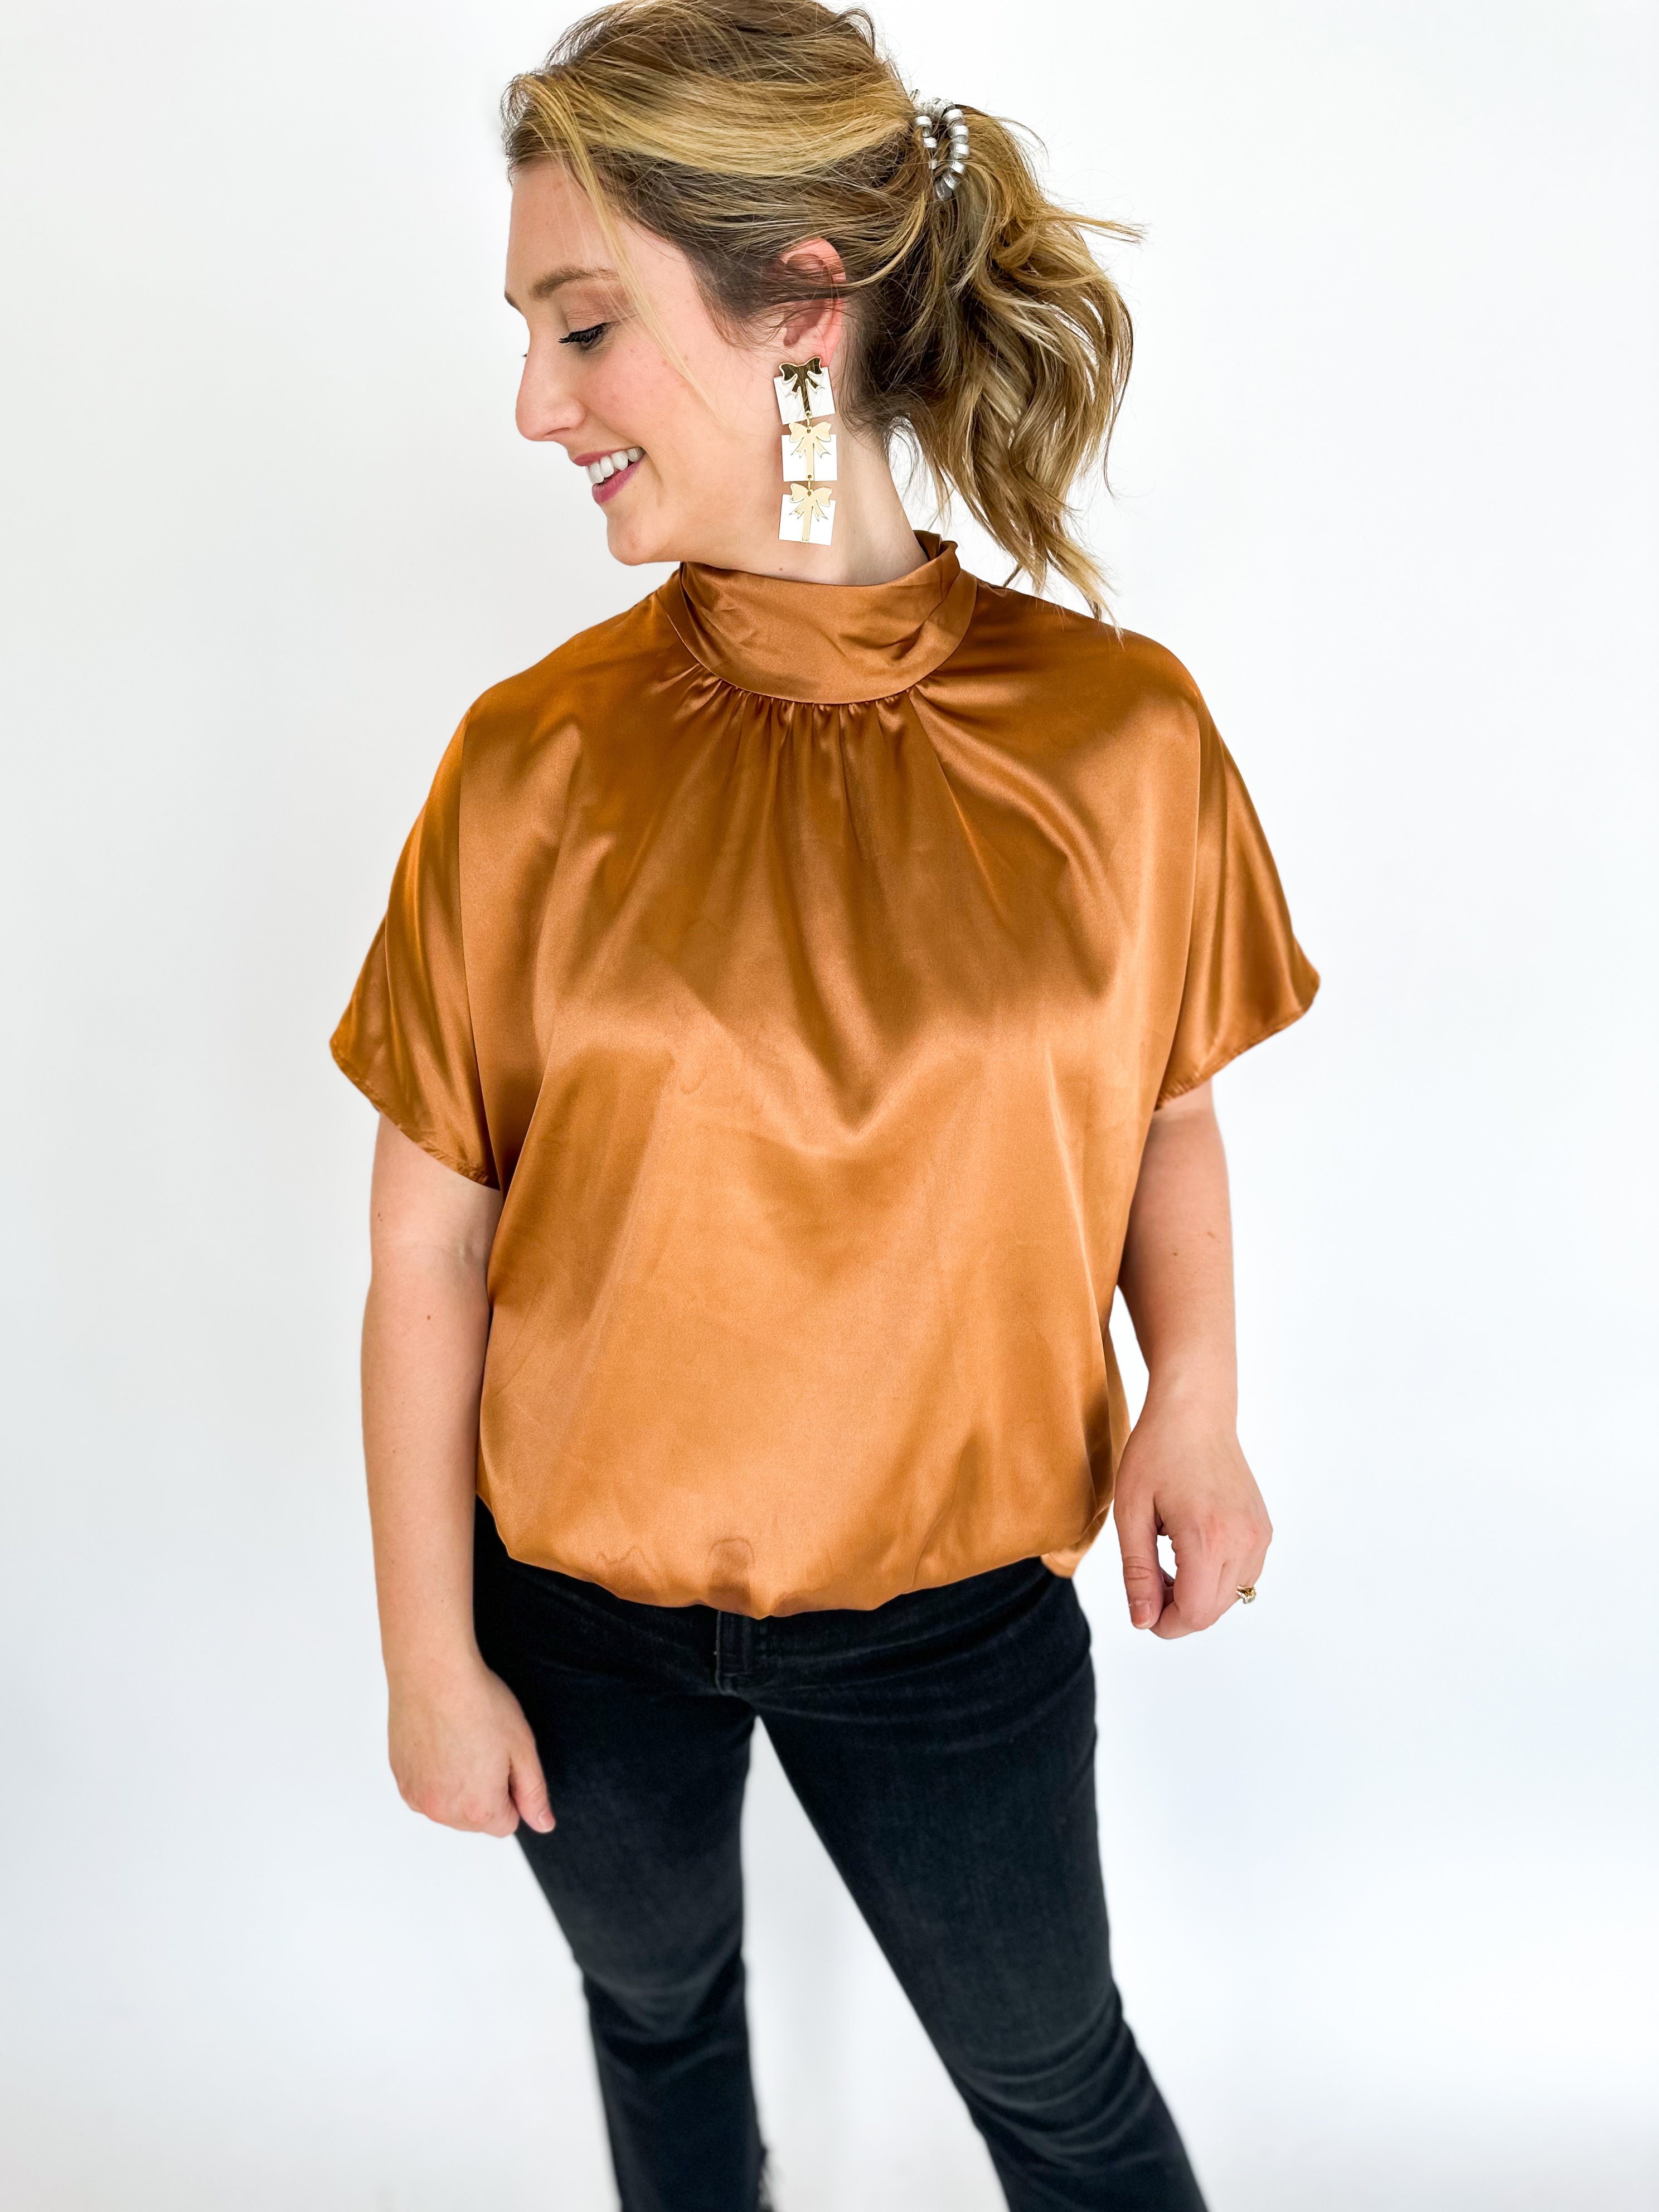 Charming Satin Blouse - Golden-200 Fashion Blouses-ADRIENNE-July & June Women's Fashion Boutique Located in San Antonio, Texas